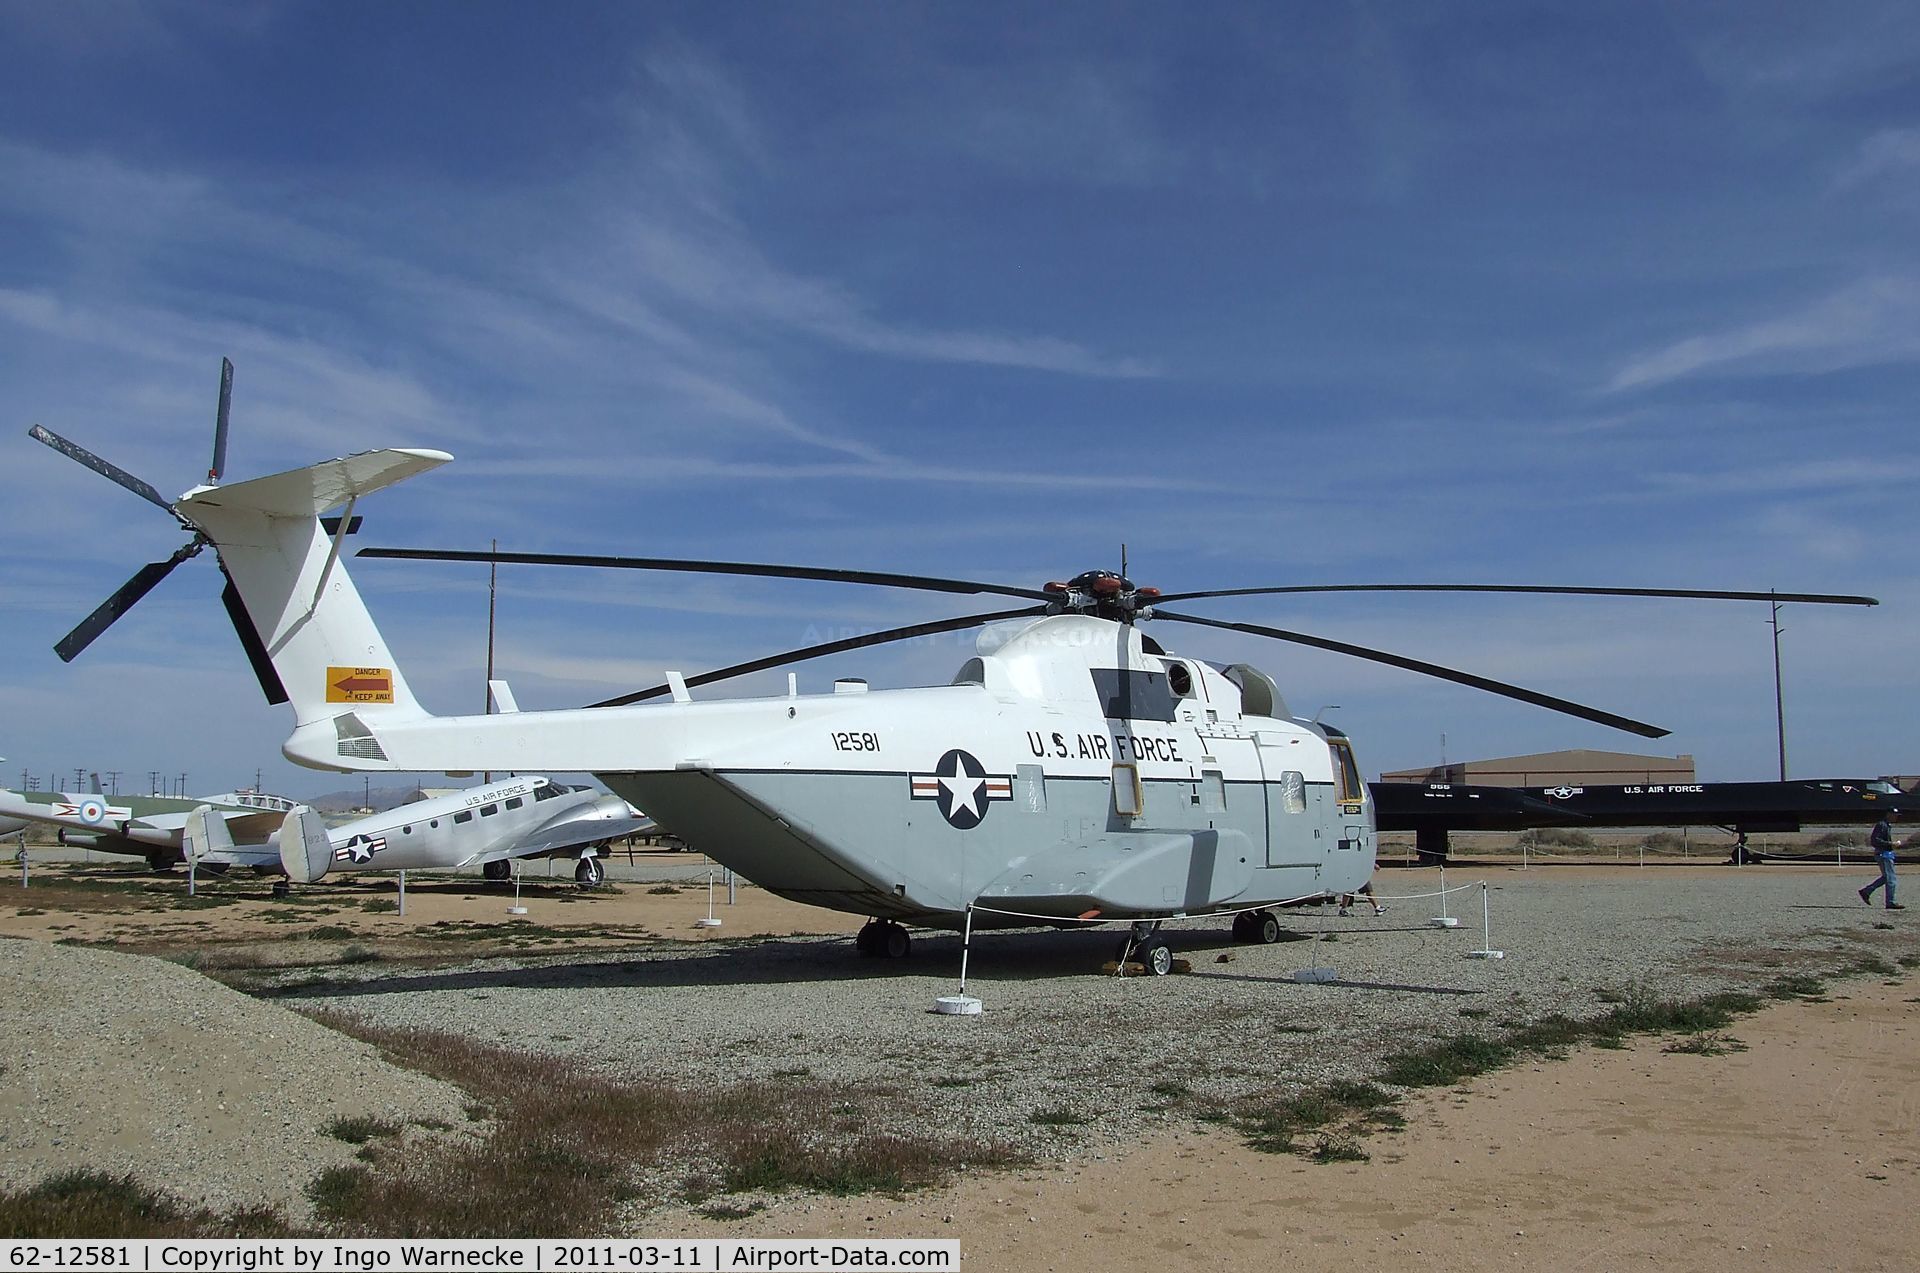 62-12581, Sikorsky JCH-3E C/N 61506, Sikorsky JCH-3E at the Air Force Flight Test Center Museum, Edwards AFB CA